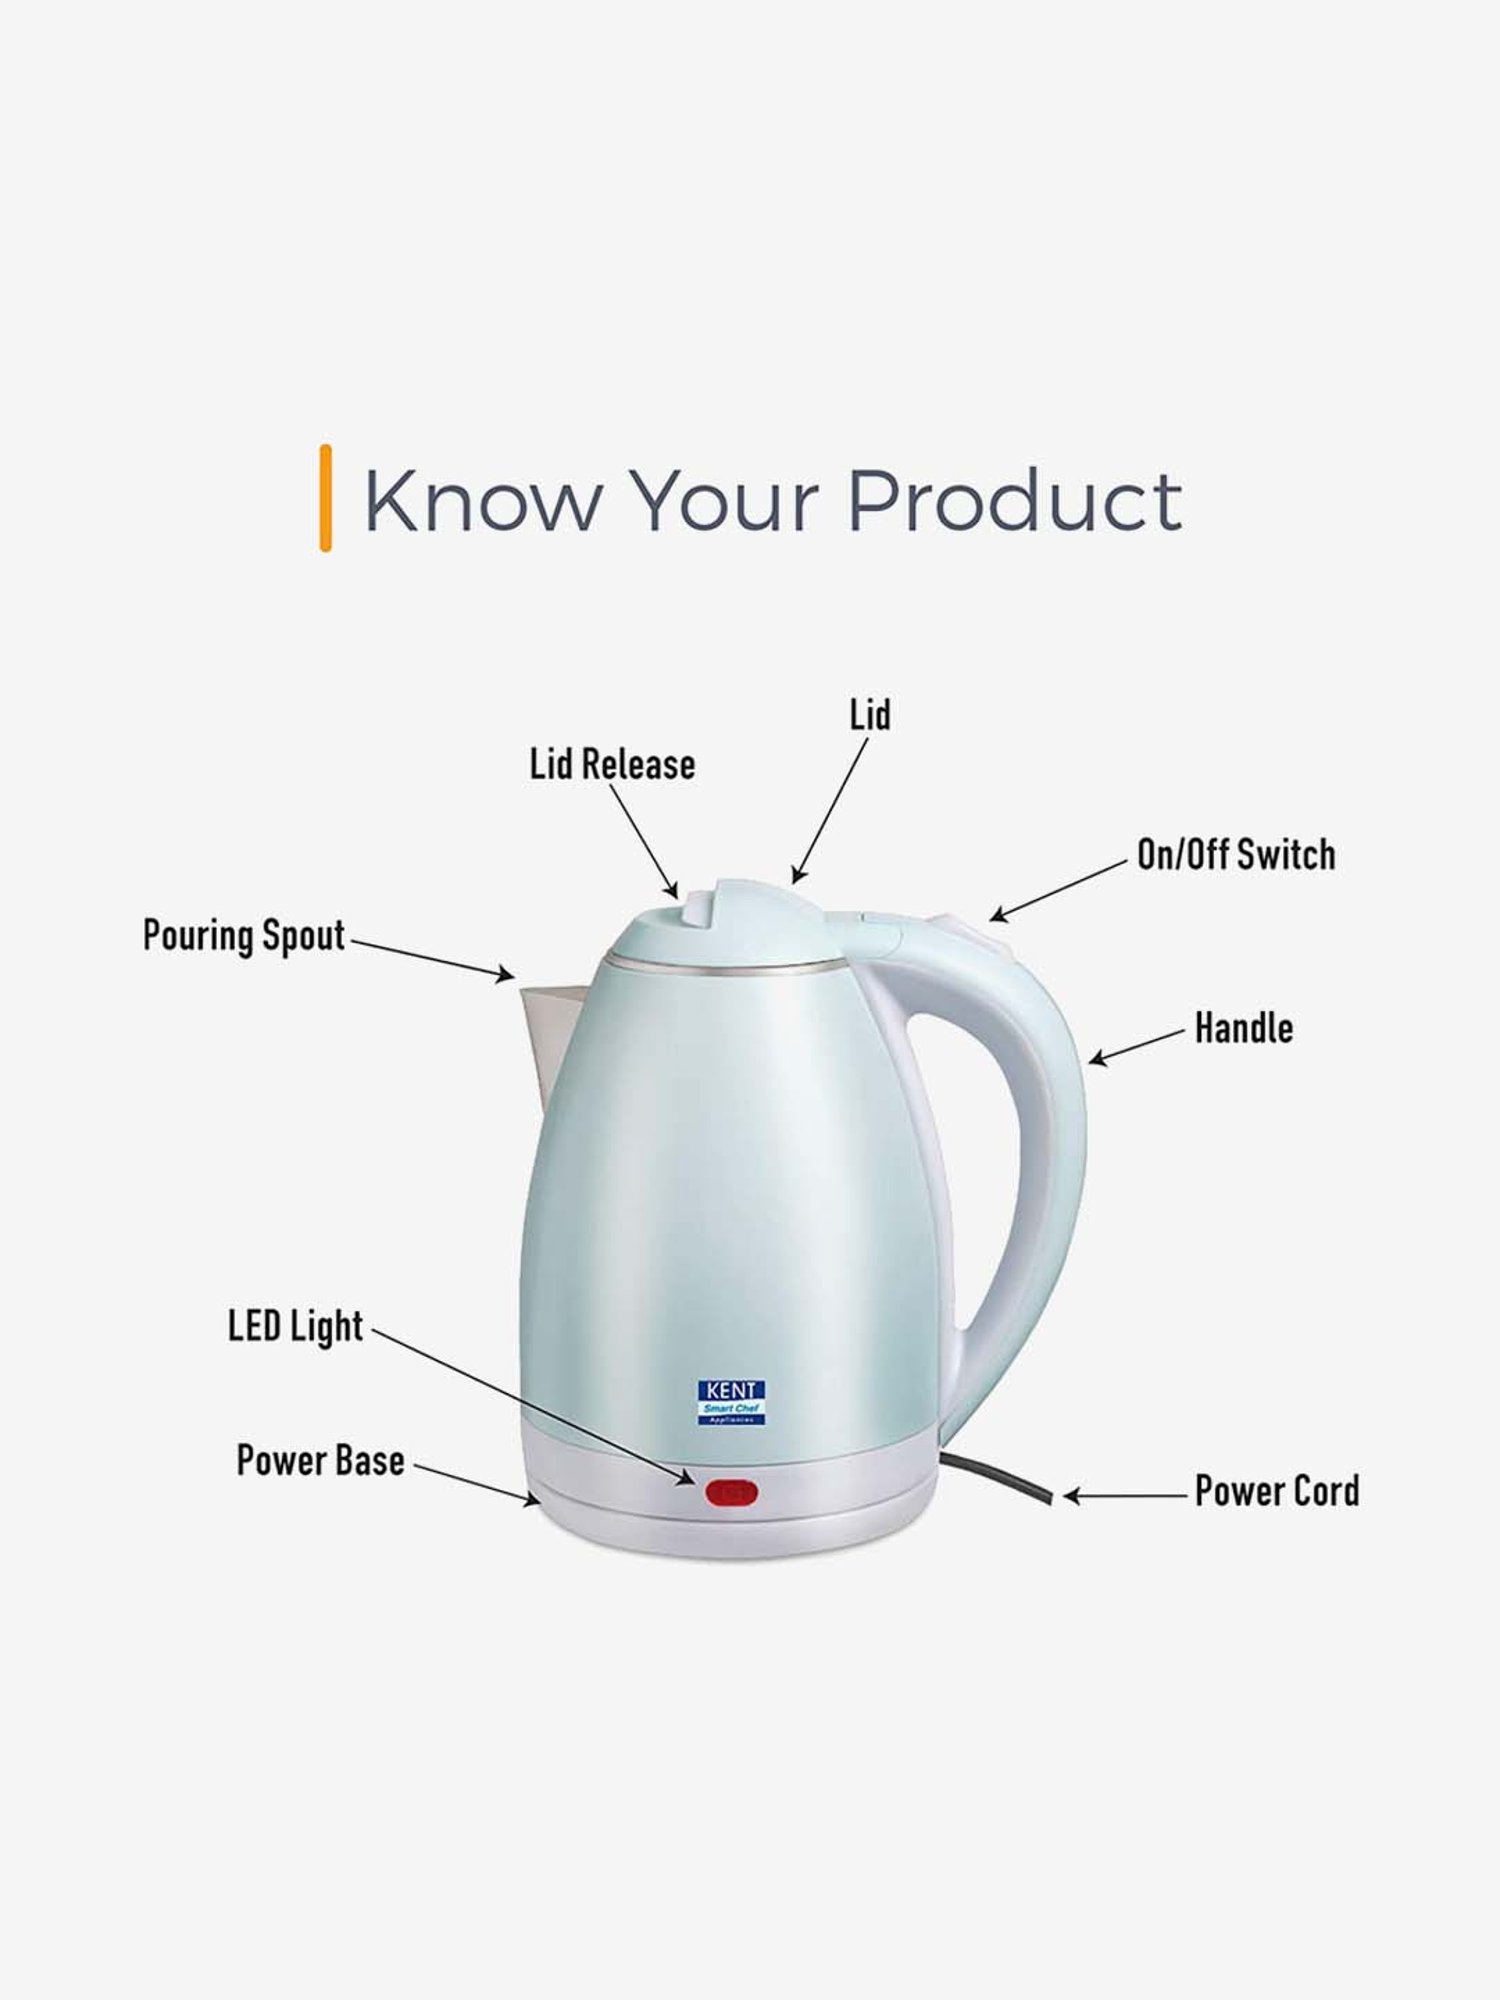 kent electric kettle ss